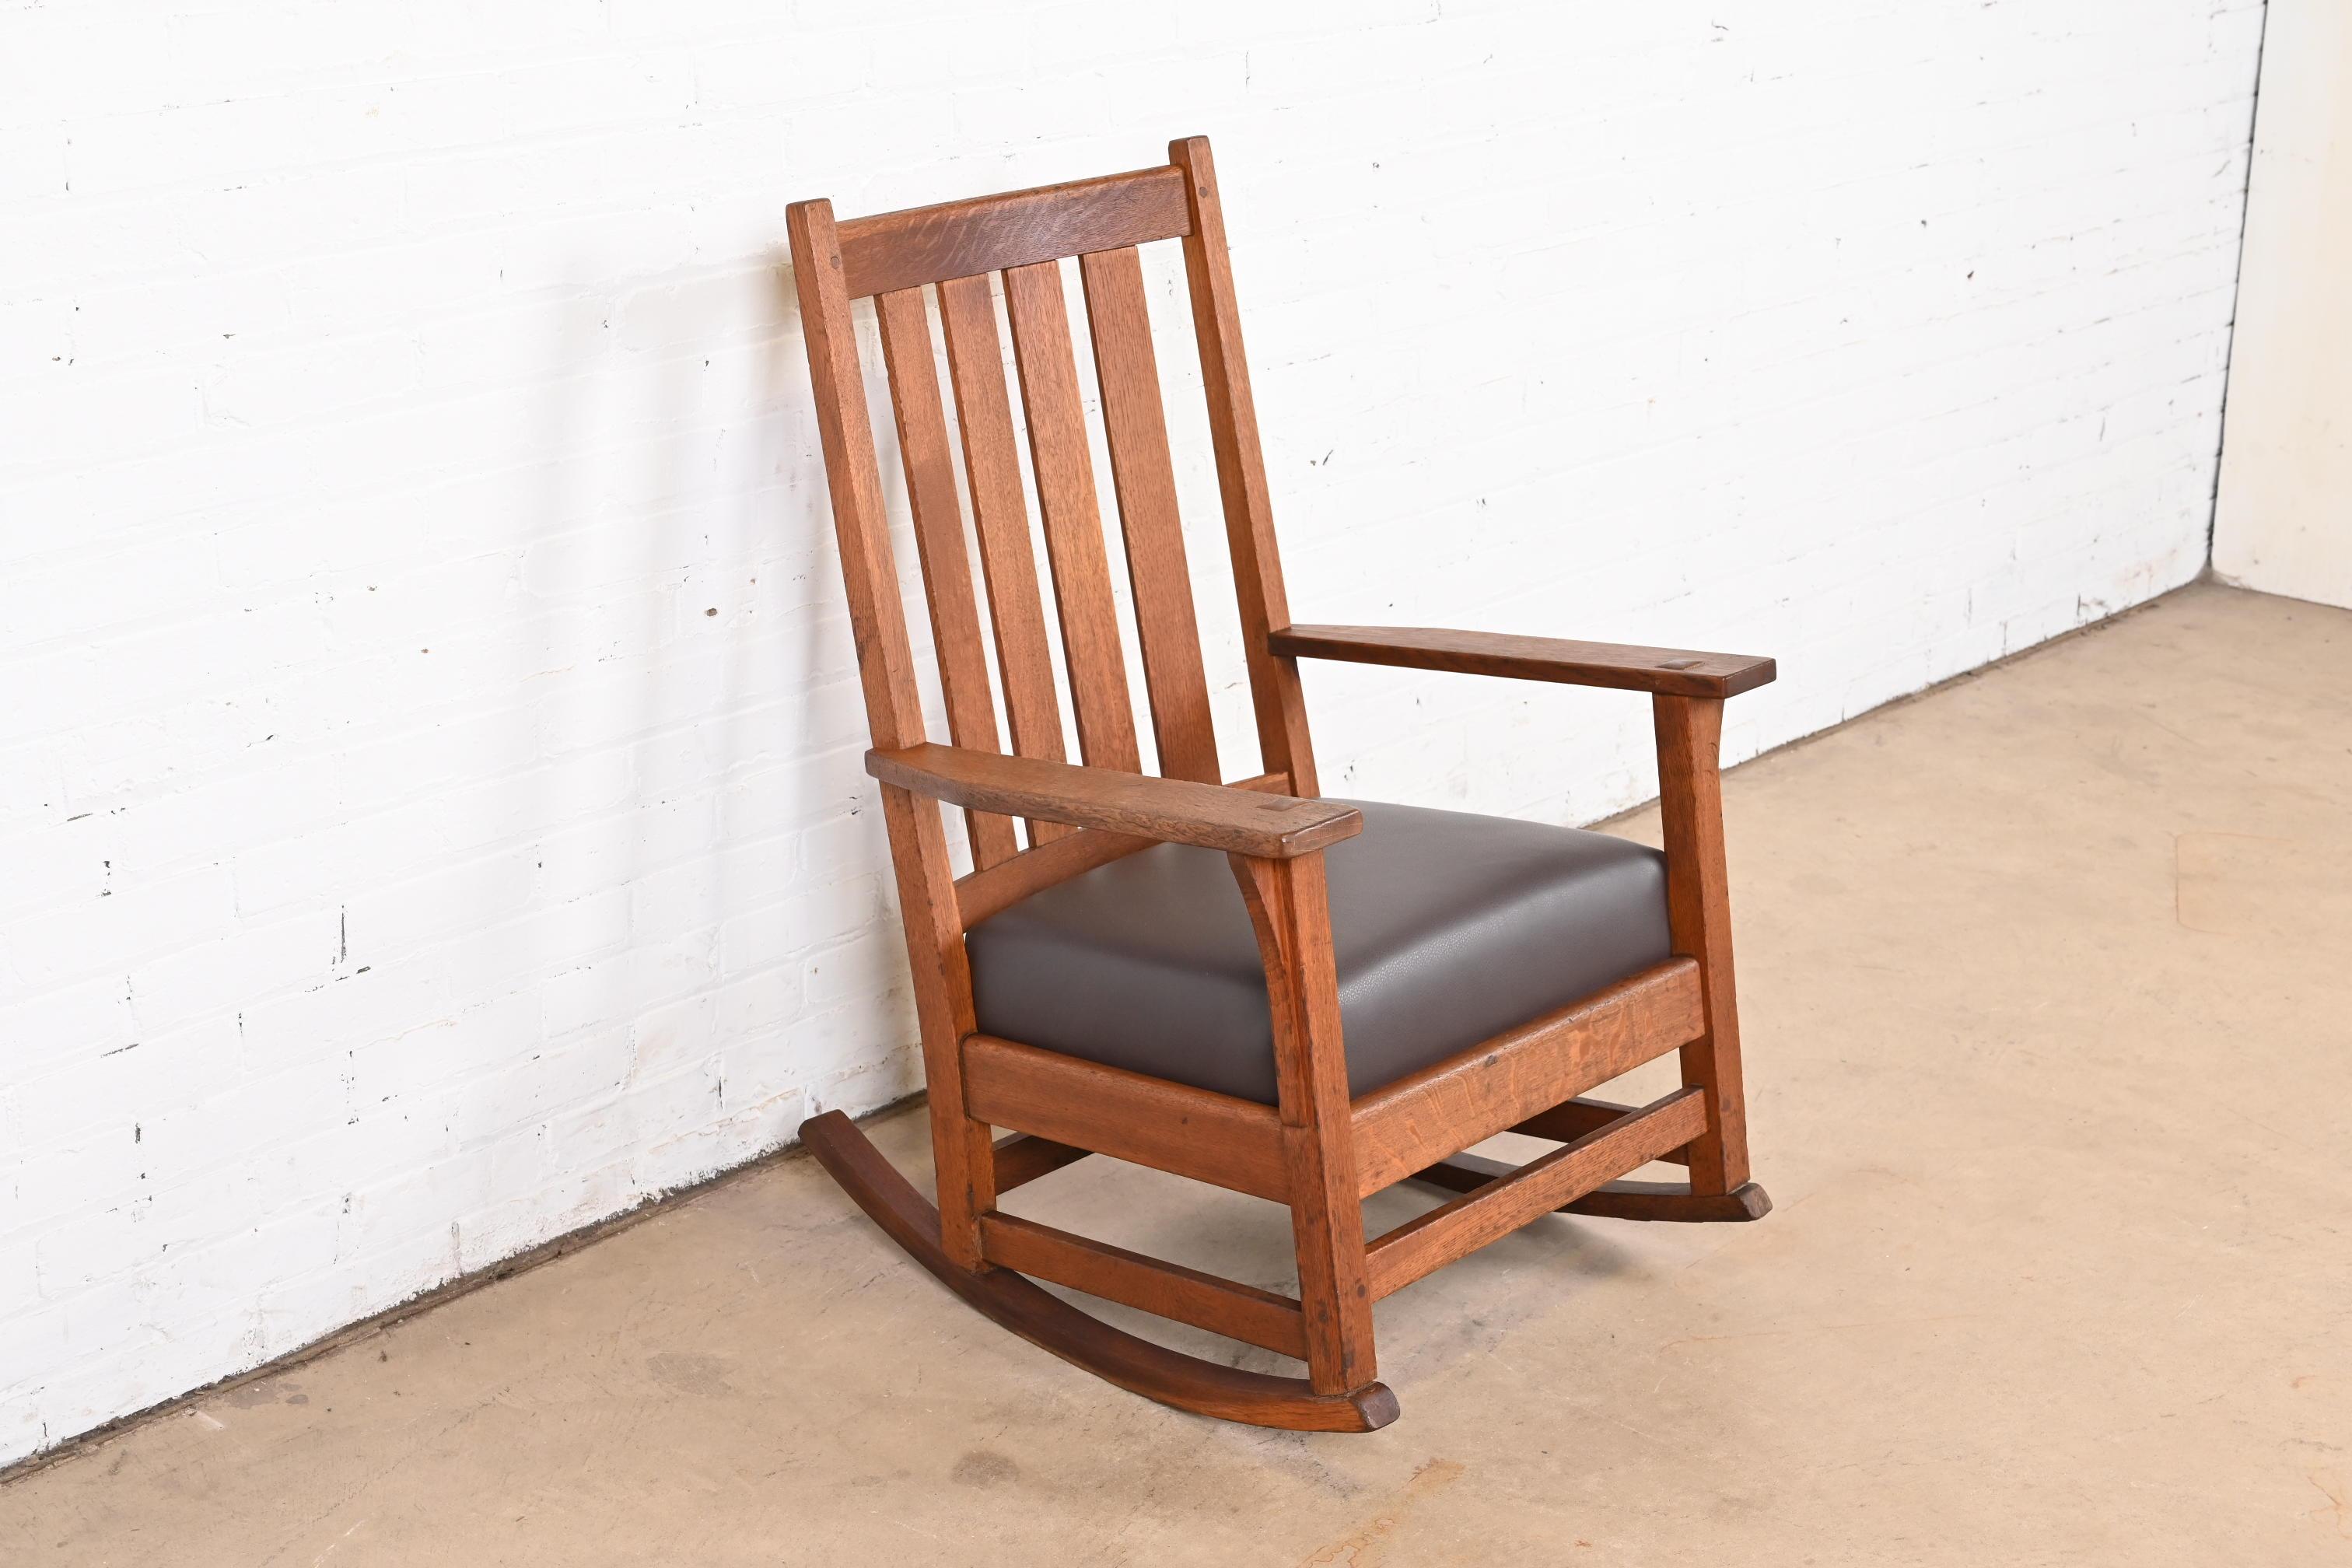 L. & J.G. Stickley Antique Mission Oak Arts & Crafts Rocking Chair, Circa 1900 In Good Condition For Sale In South Bend, IN